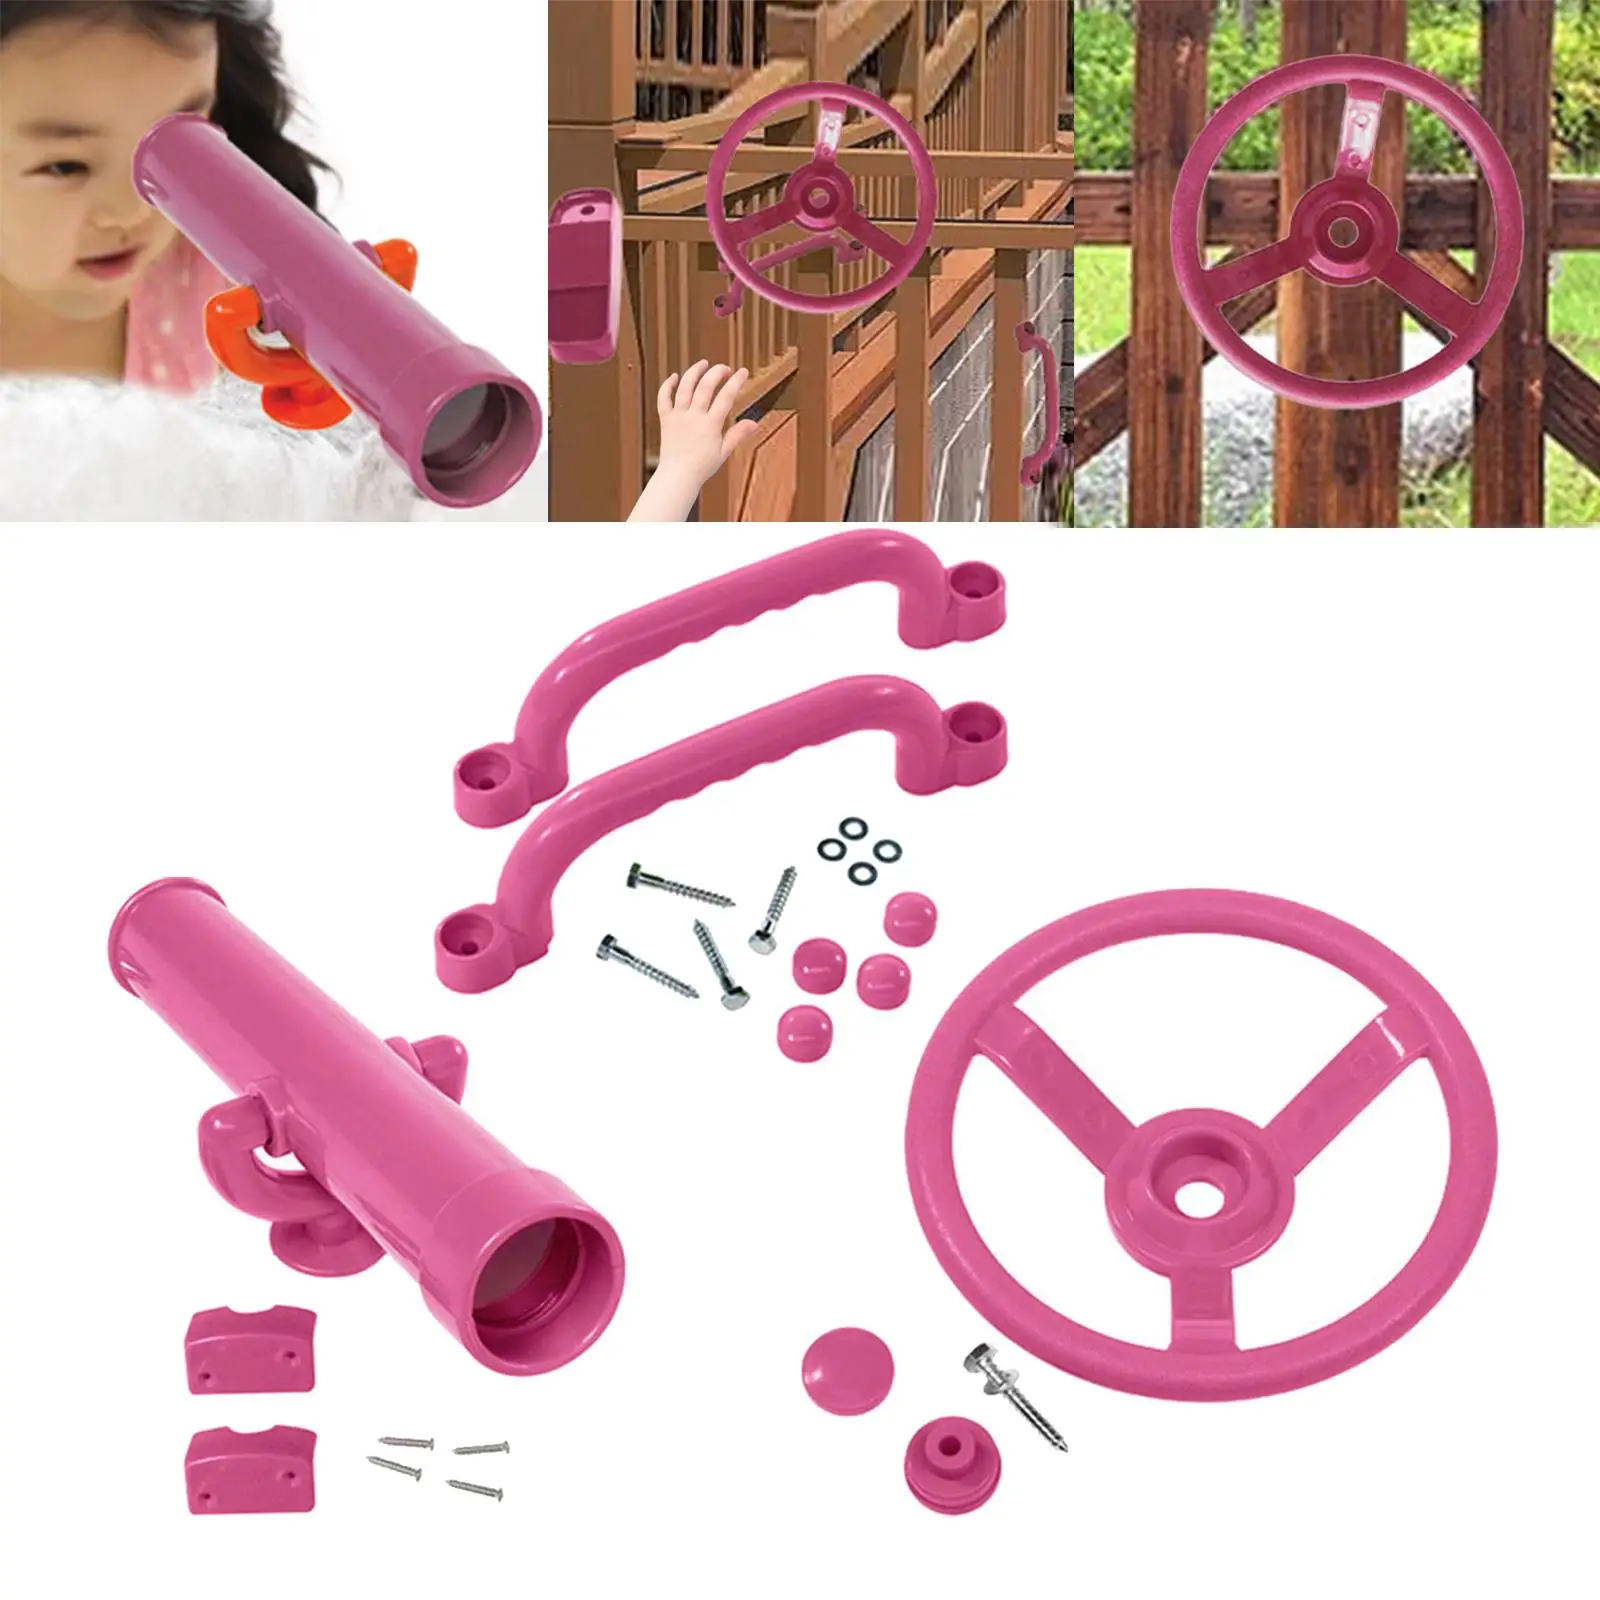 Playground Accessories Pirate Ship Wheel for Kids Valentines Day Gifts for Jungle Gym Tree House Backyard Swingset Attachments